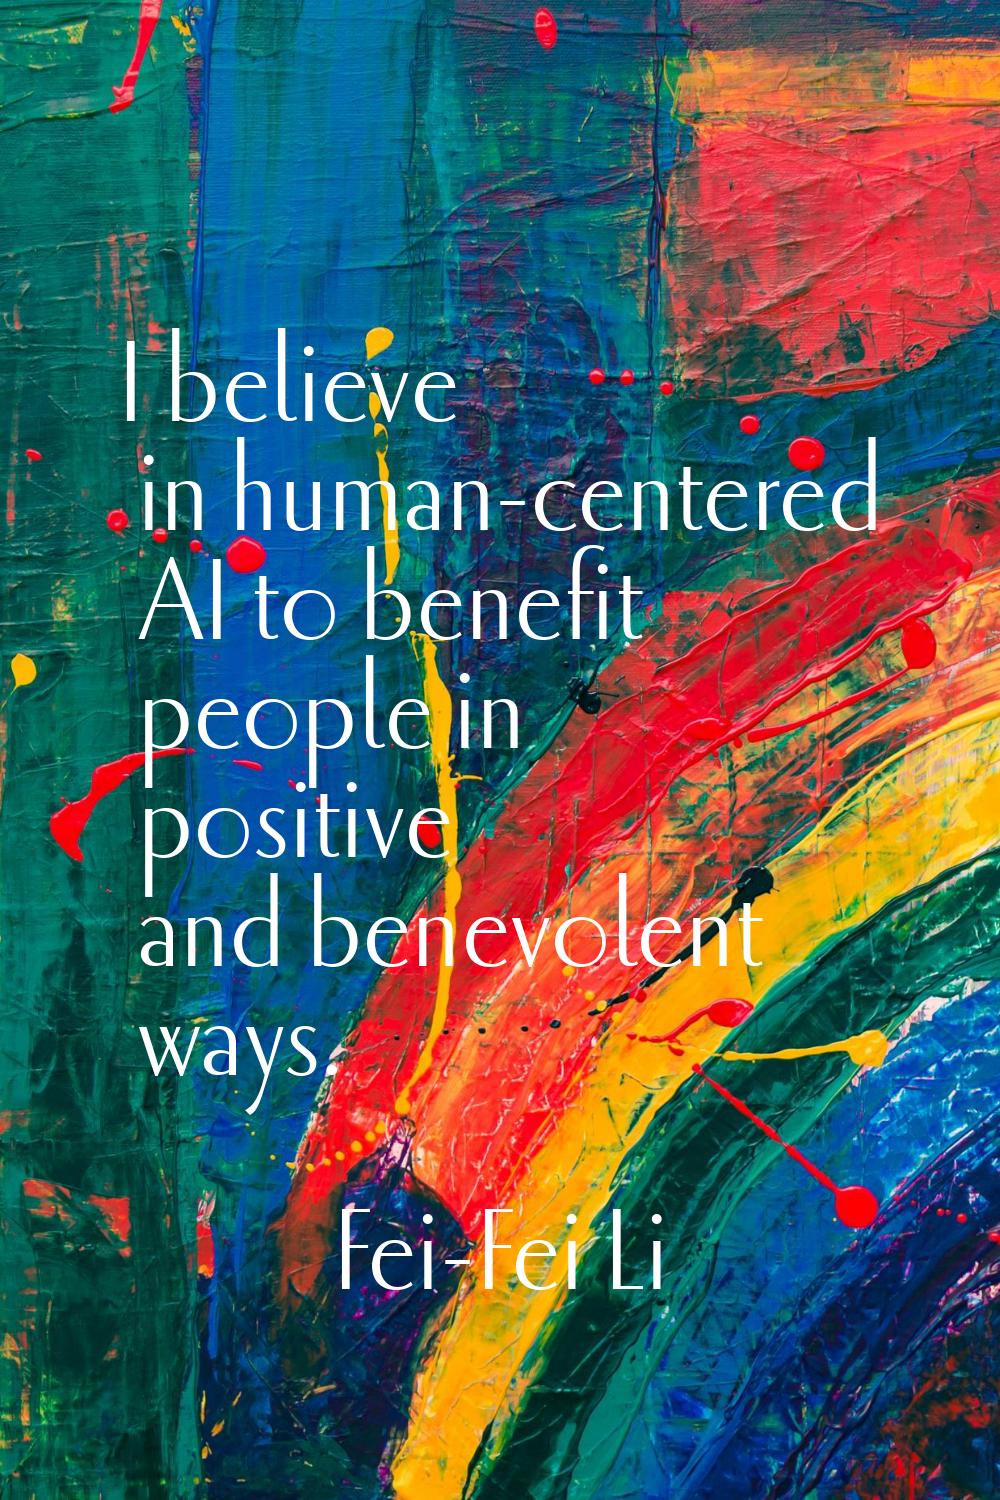 I believe in human-centered AI to benefit people in positive and benevolent ways.